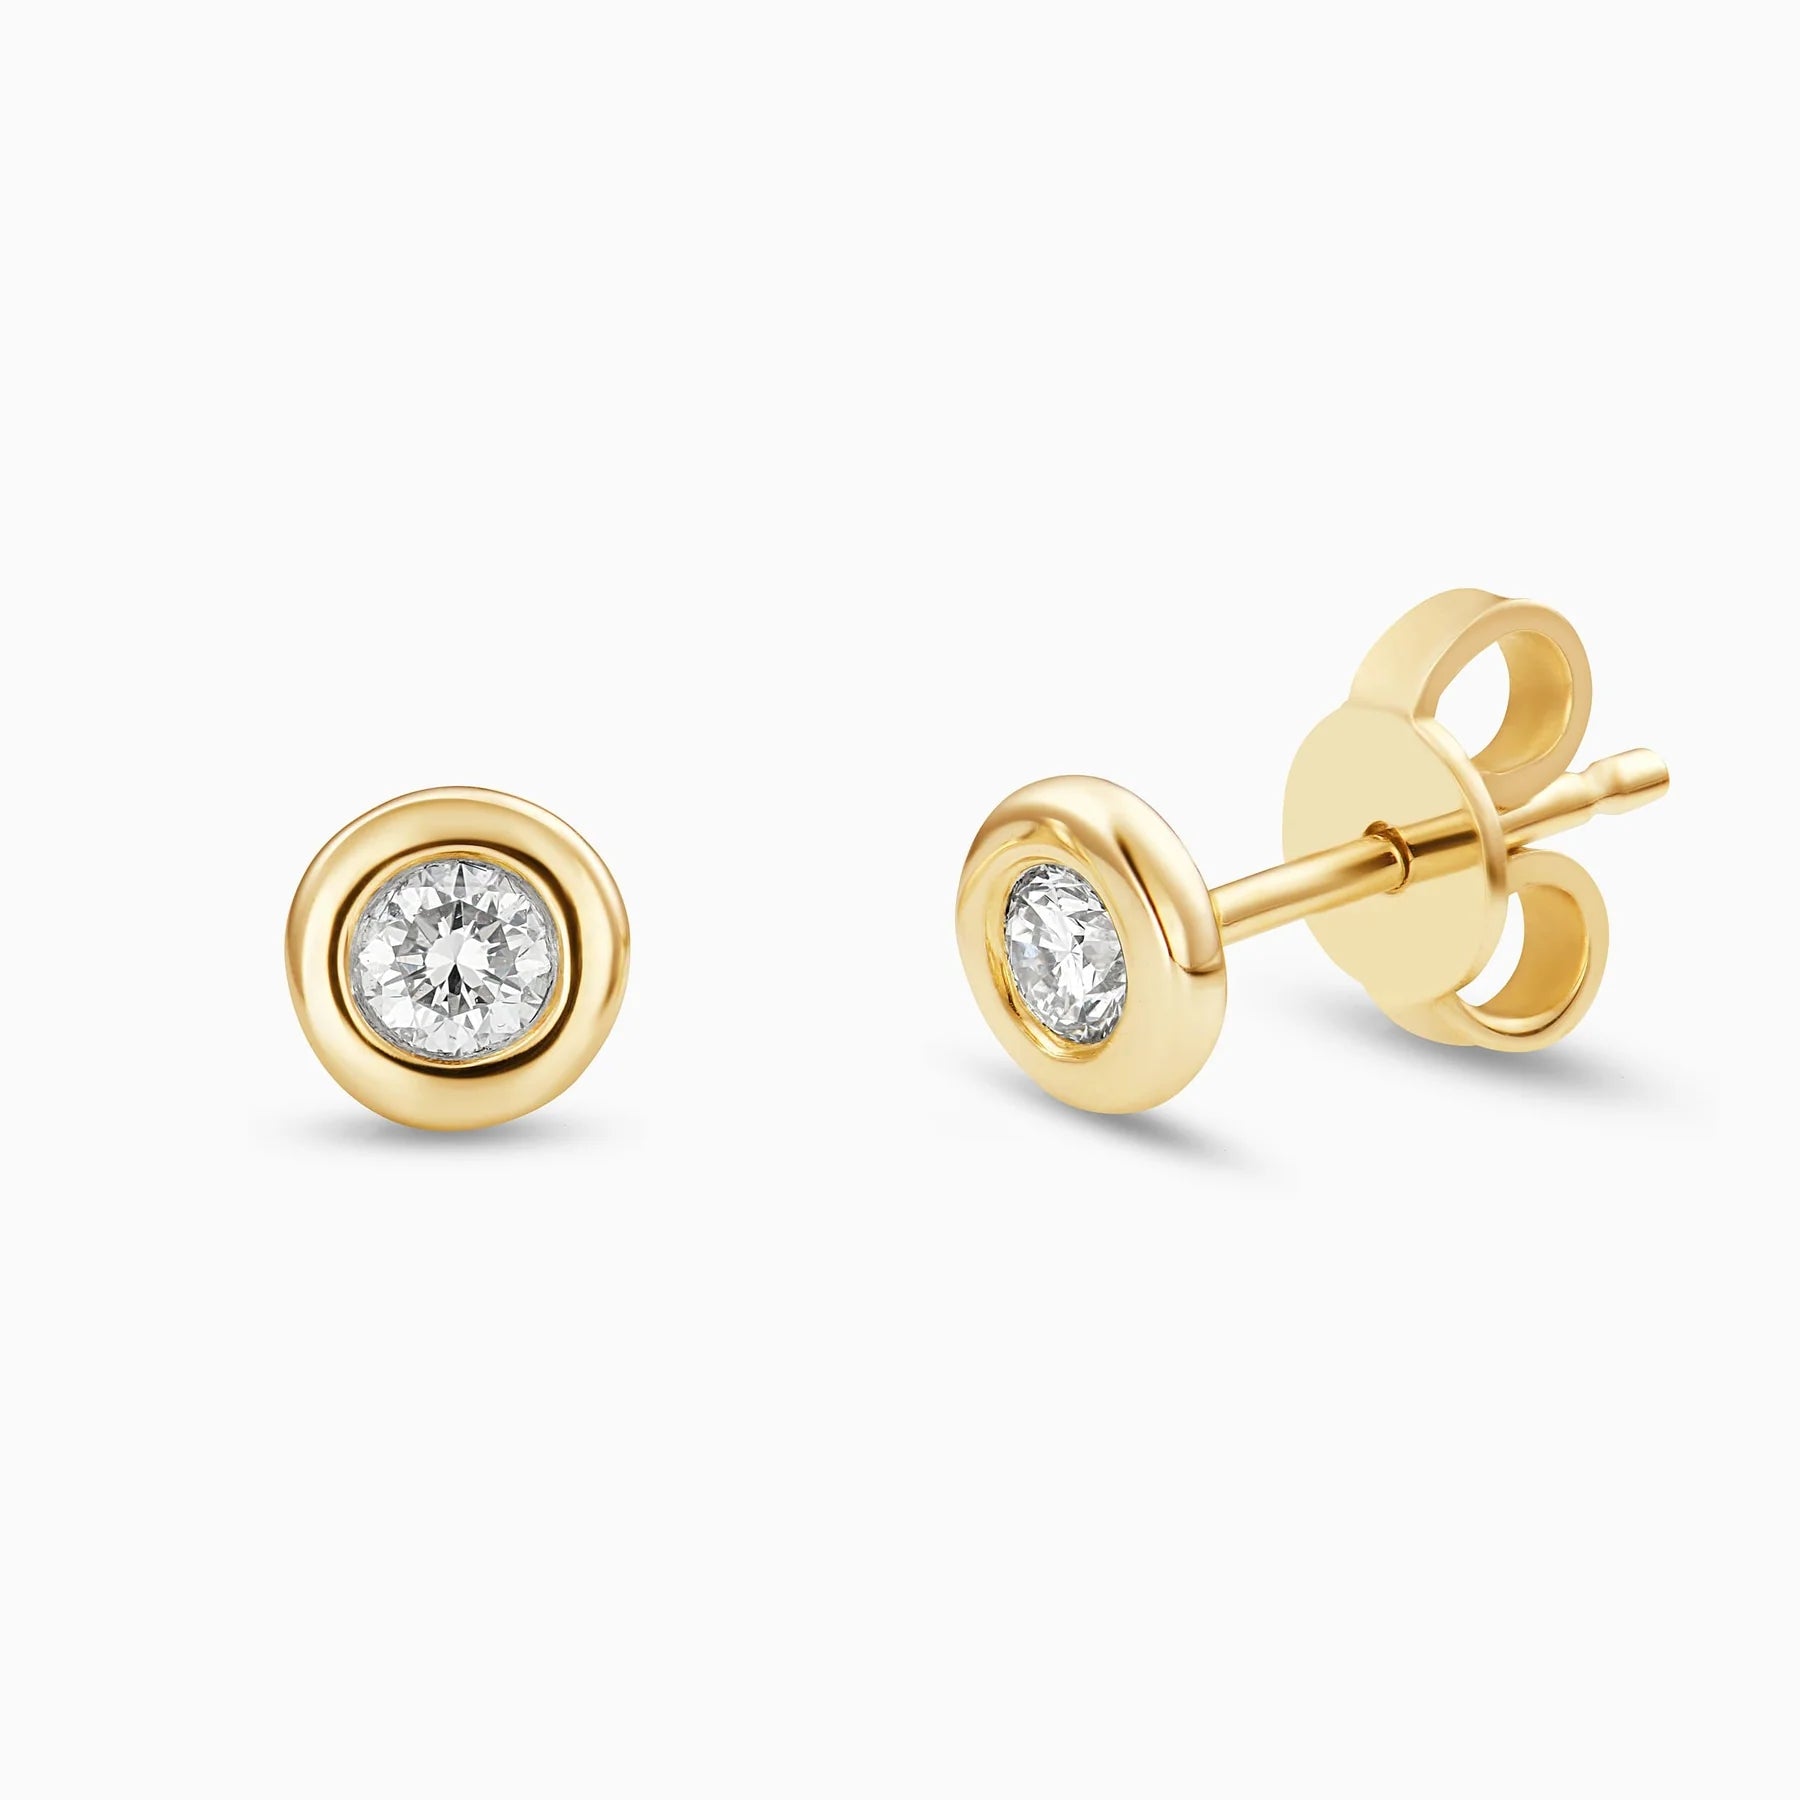 Essential everyday studs by Caye Joaillier available at Falena Fine Jewelry in Yellow Gold. Option of .2 or .5 ct